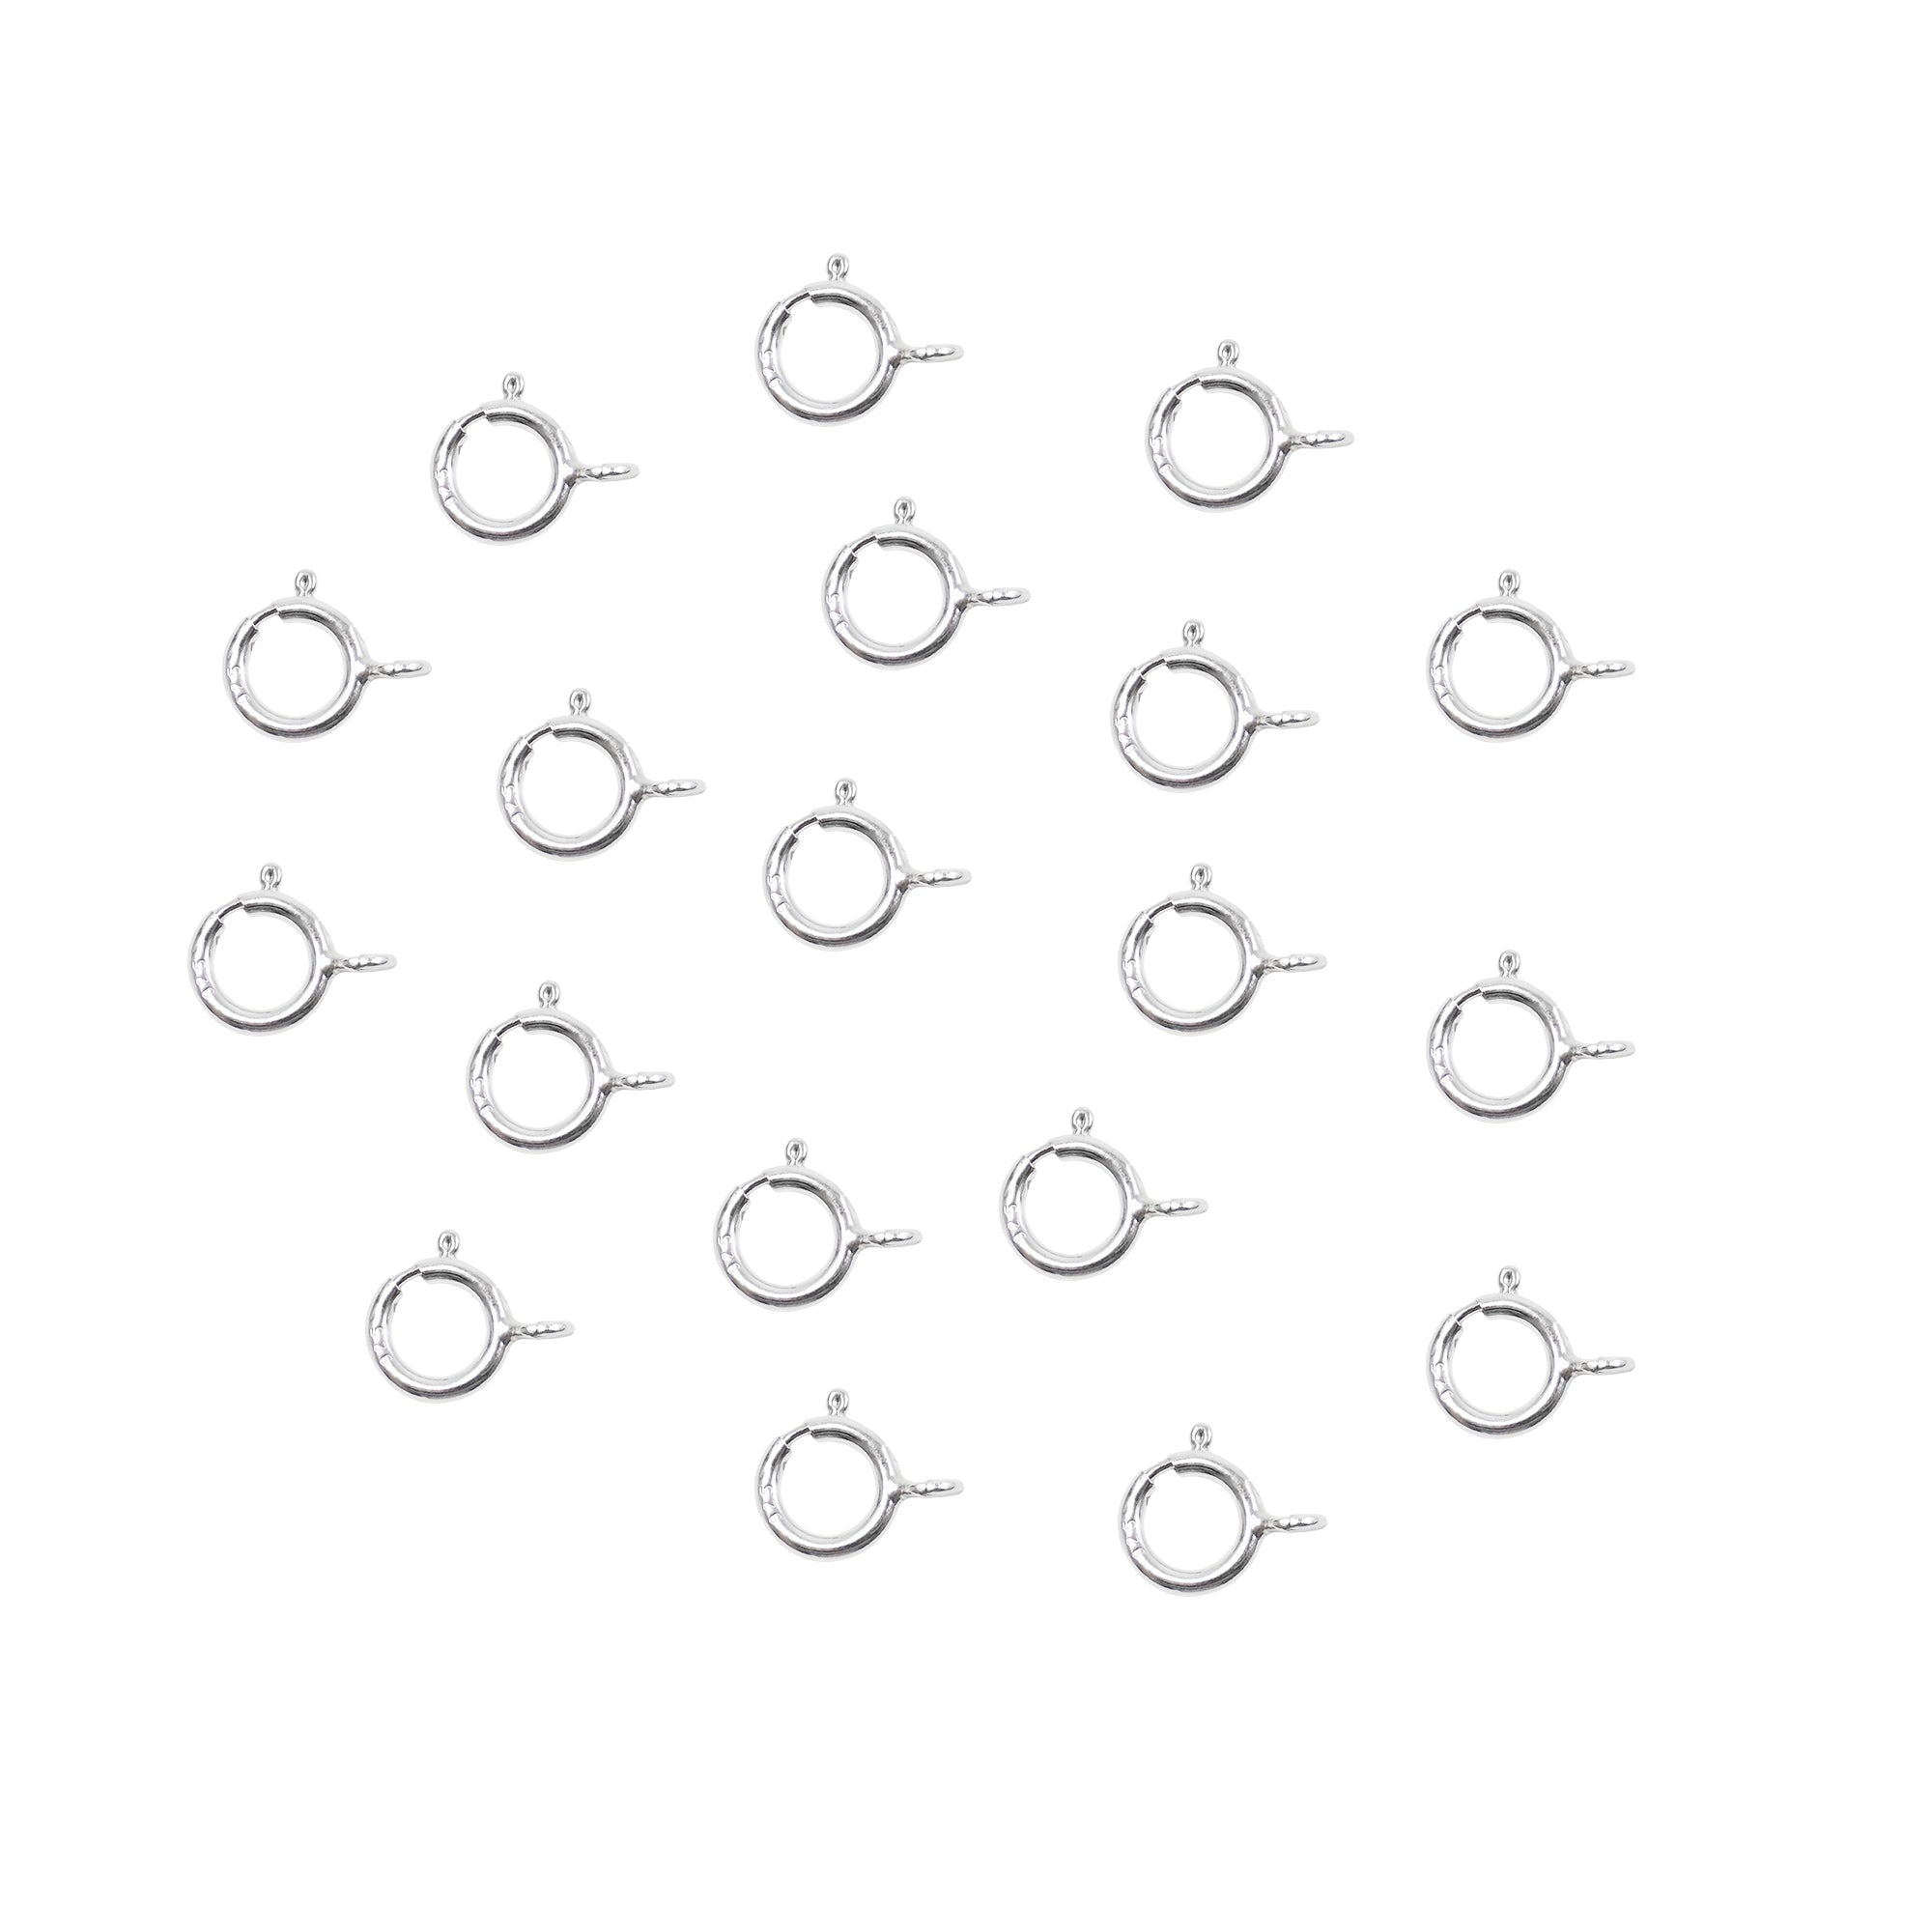 Sterling Silver Beads 3mm 25Pcs, Genuine Italian 925 Sterling Silver 3